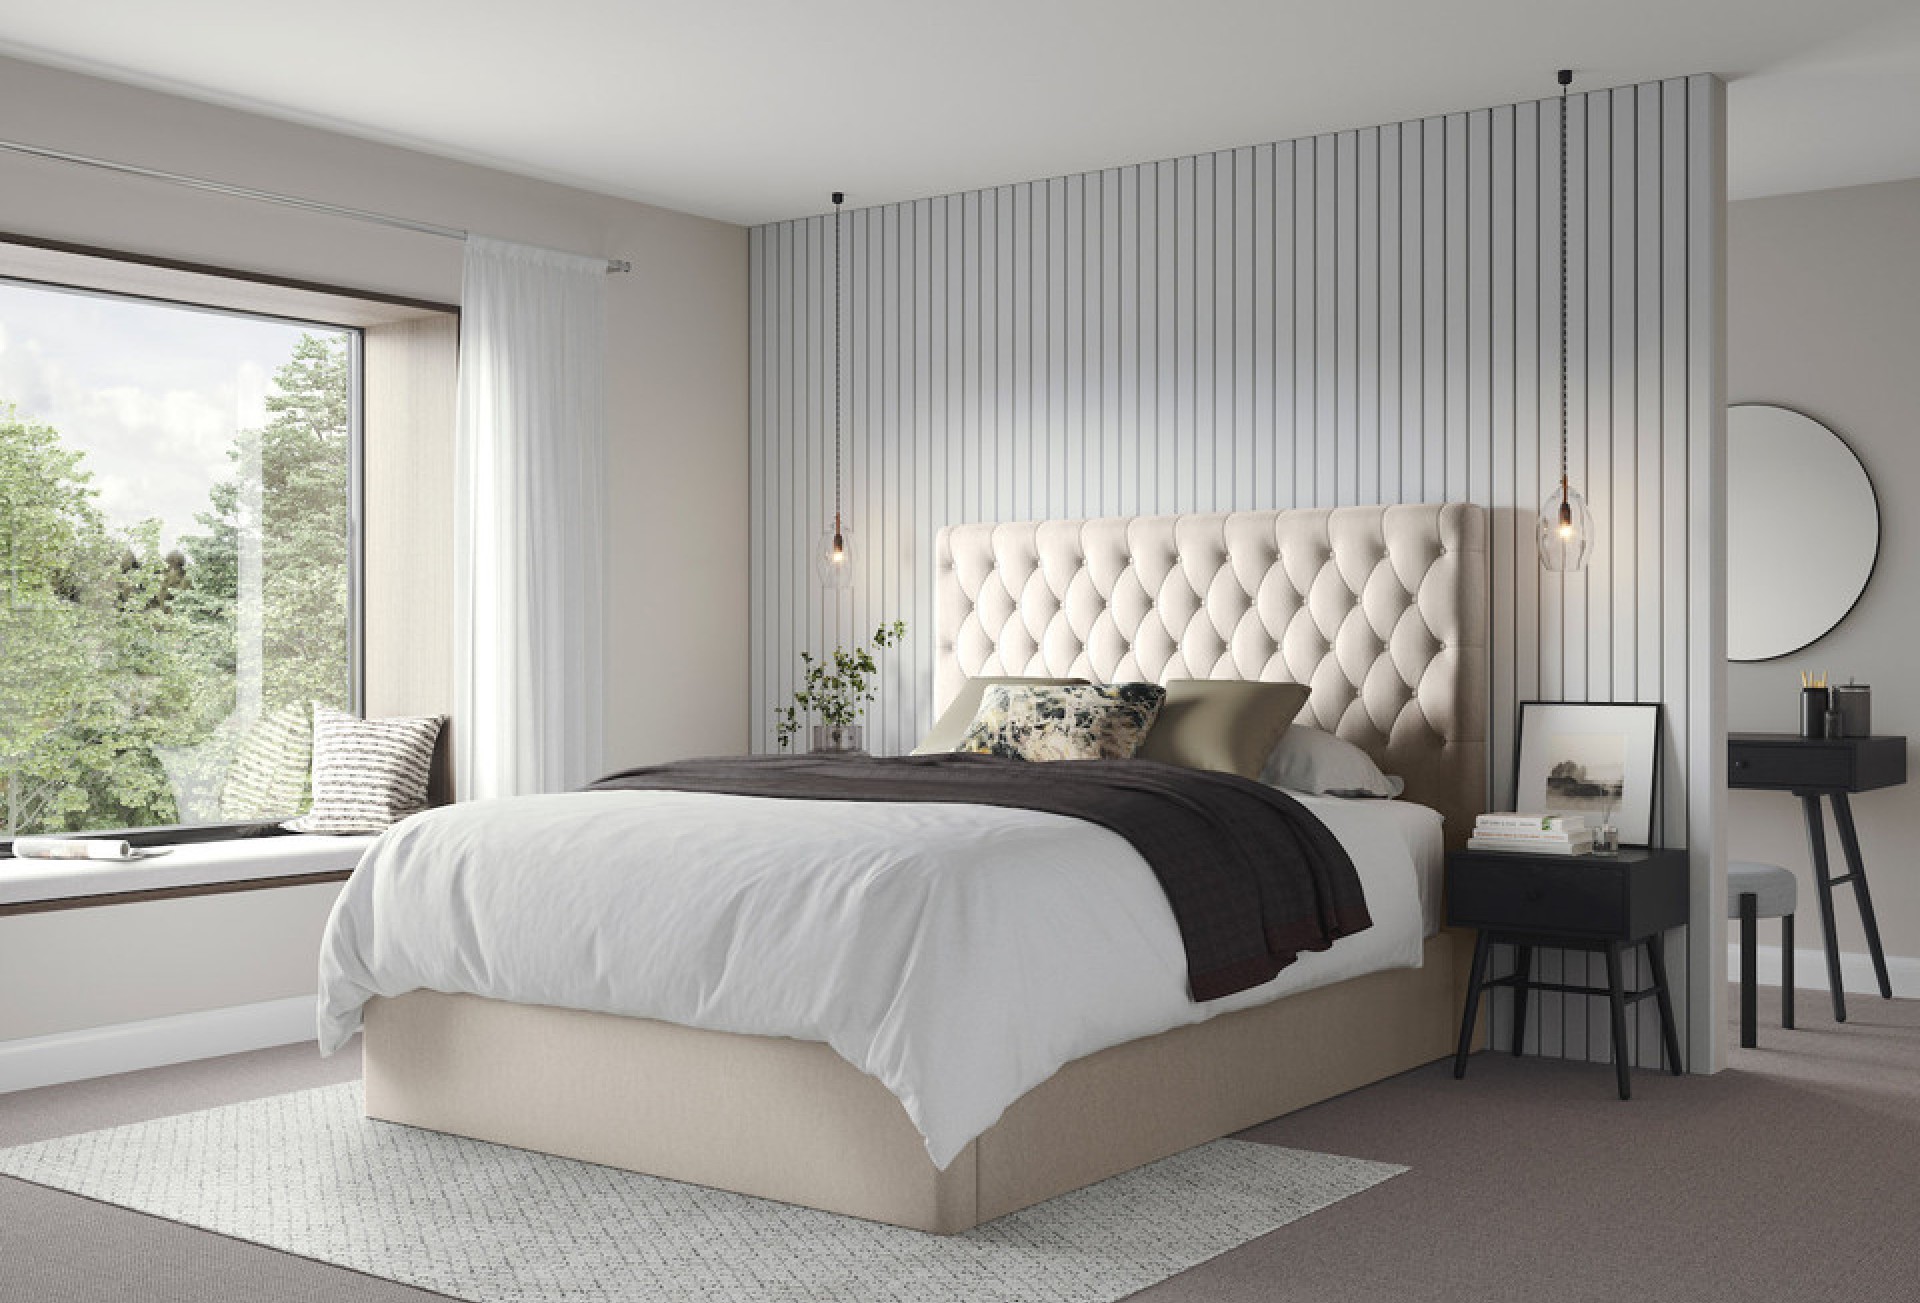 Valentina ottoman bed frame with deep buttoned headboard in mink set in a contemporary minimalist bedroom design